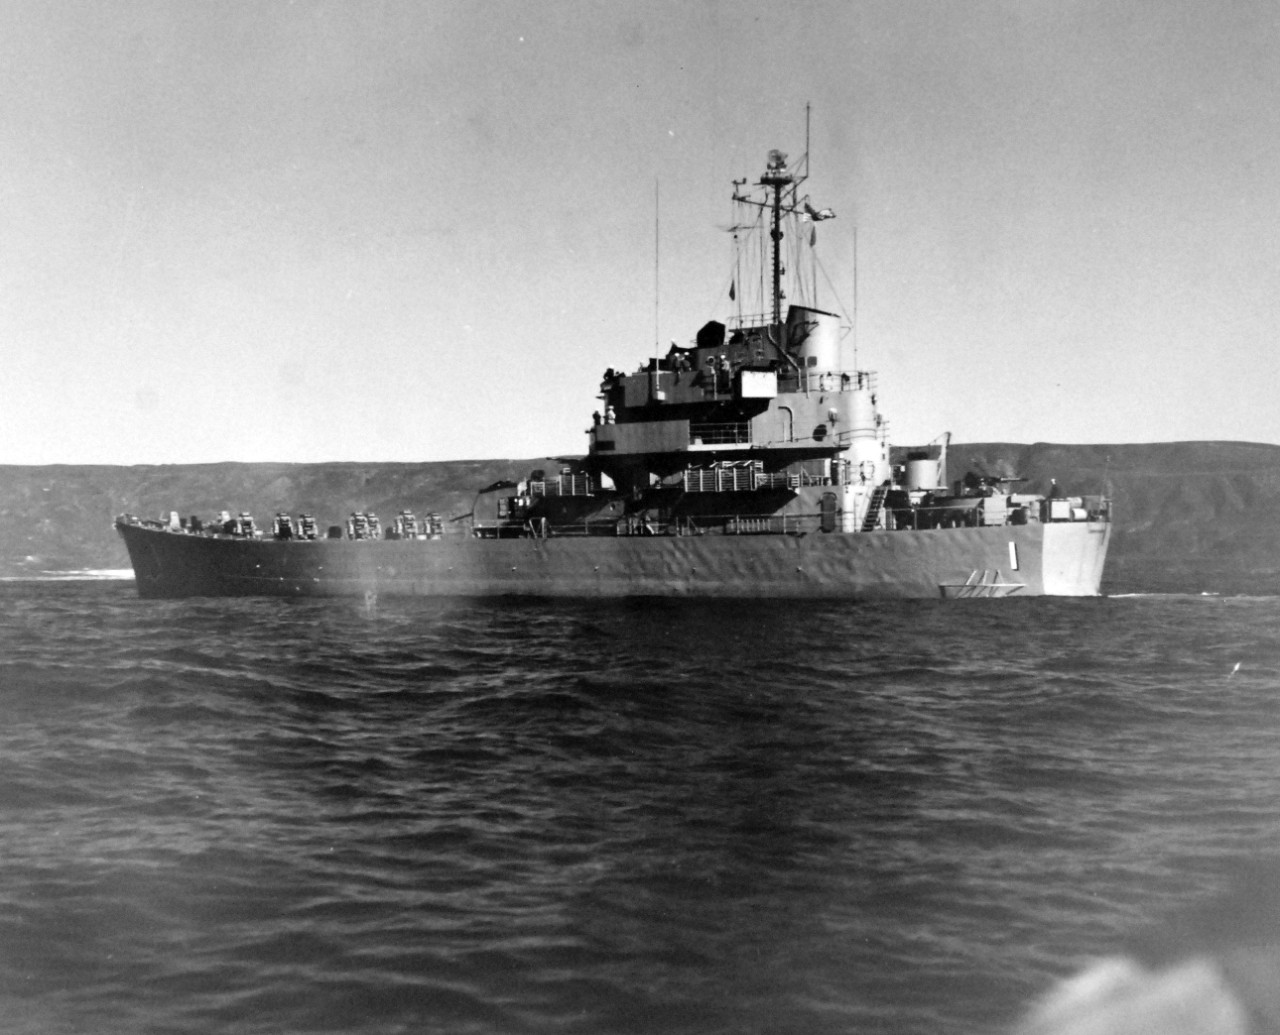 80-G-689758:  USS Carronade (IFS-1), 1955-59.  Carronade was an Inshore Fire Support Ship, built to provide gunfire support to amphibious landings or operations close to shore. Official U.S. Navy Photograph, now in the collections of the National Archives.  (2017/11/01).  Photograph is extremely curved.  